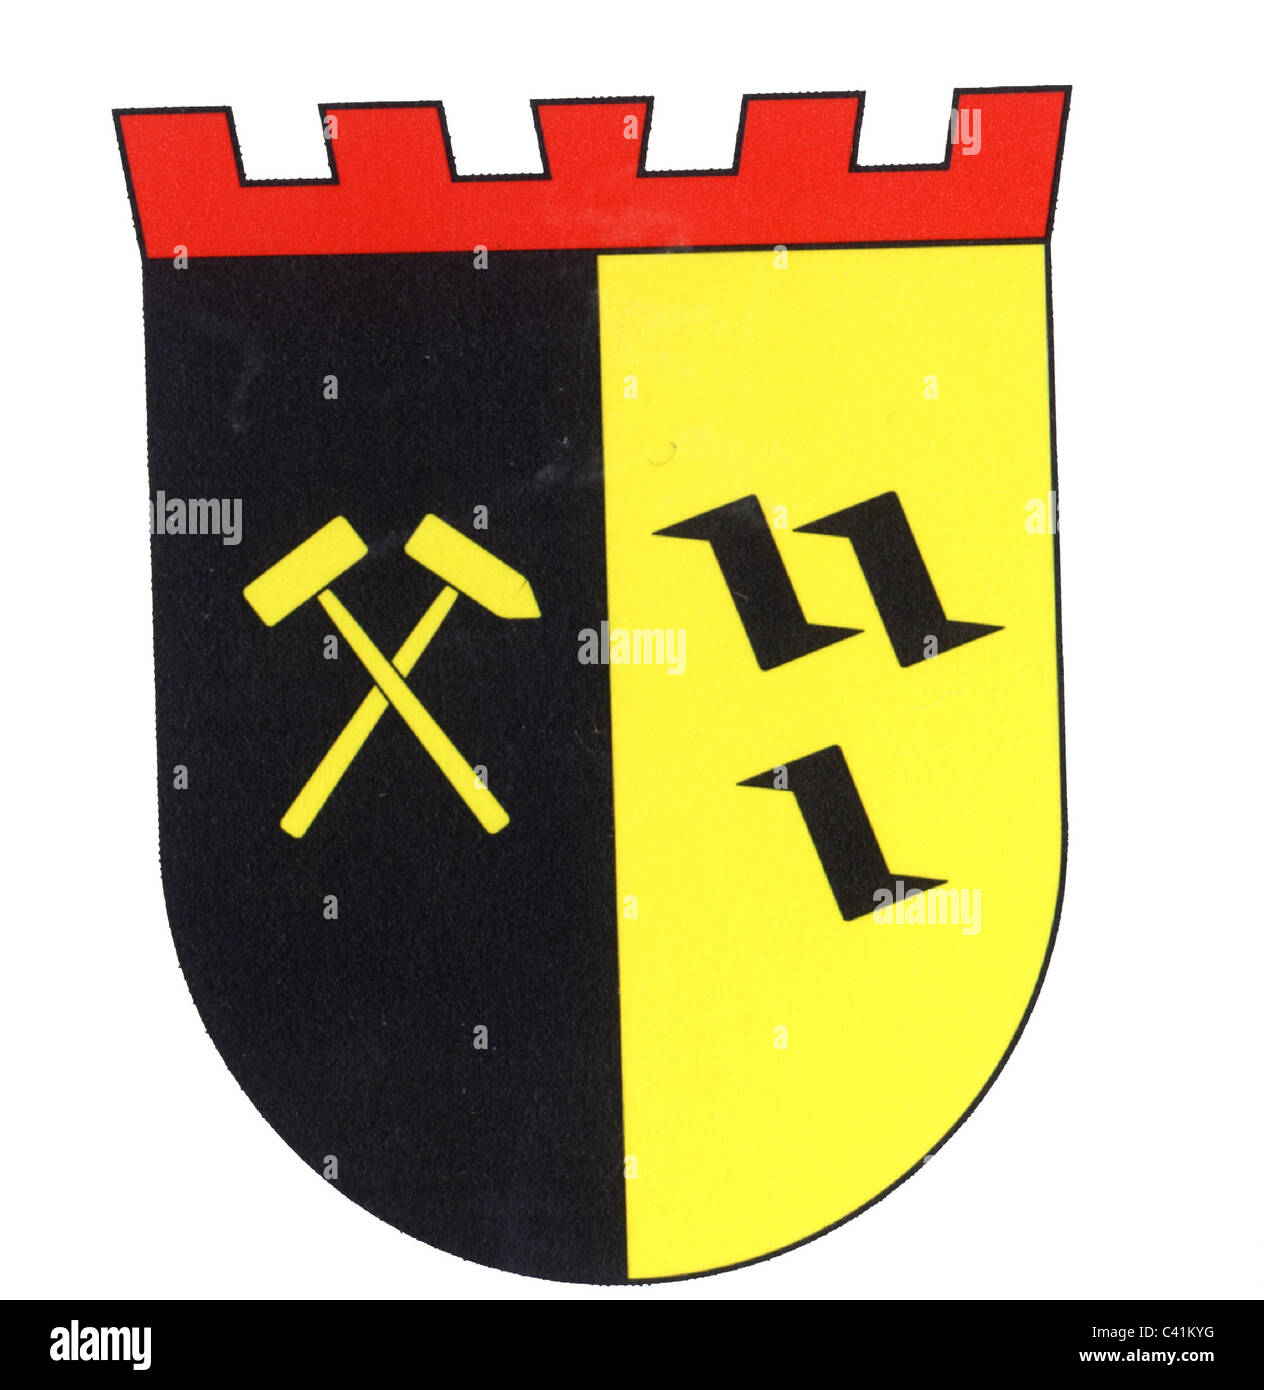 coat of arms / emblems, Gladbeck, city arms, North Rhine-Westphalia, Germany, Additional-Rights-Clearences-Not Available Stock Photo